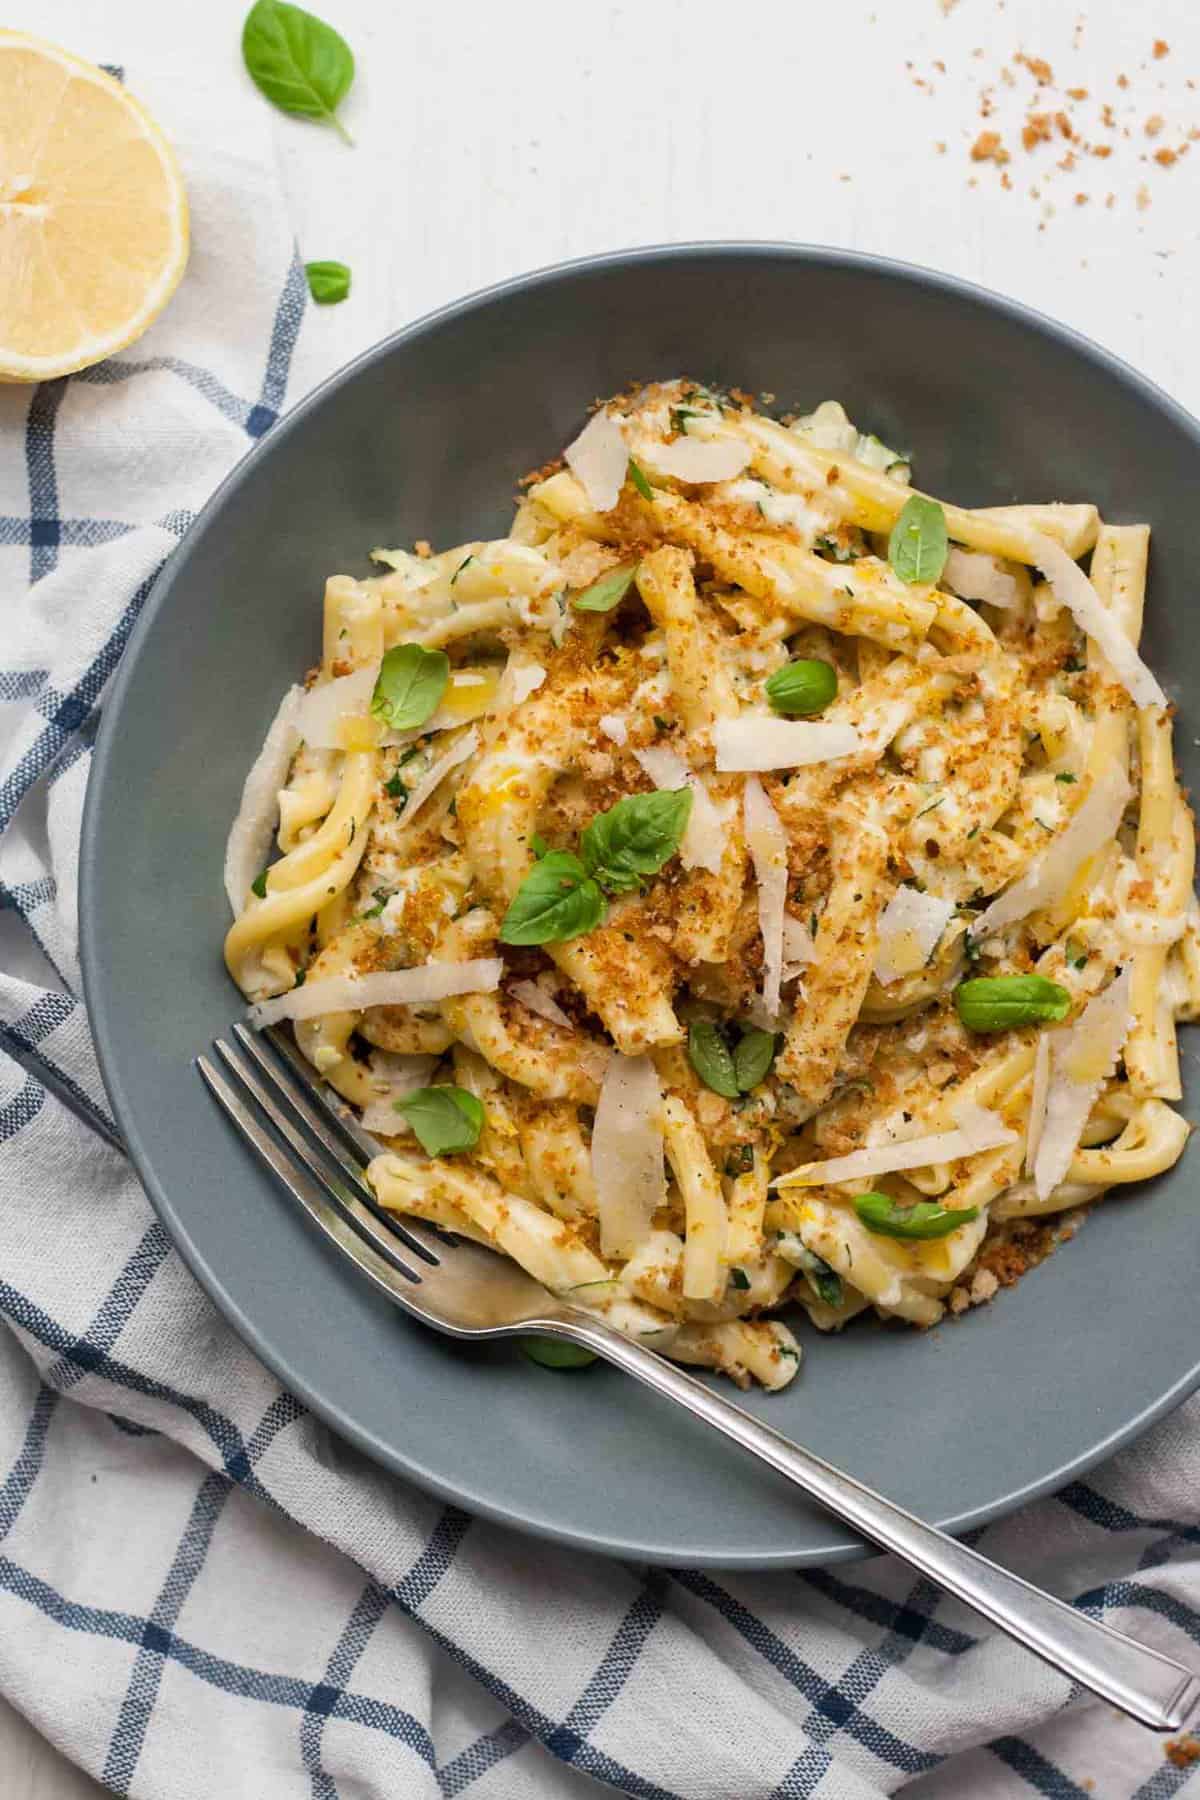 Simple Lemon Basil and Courgette Pasta - this super quick-to-make courgette/zucchini pasta dish is fresh, vibrant and comforting | eatloveeats.com